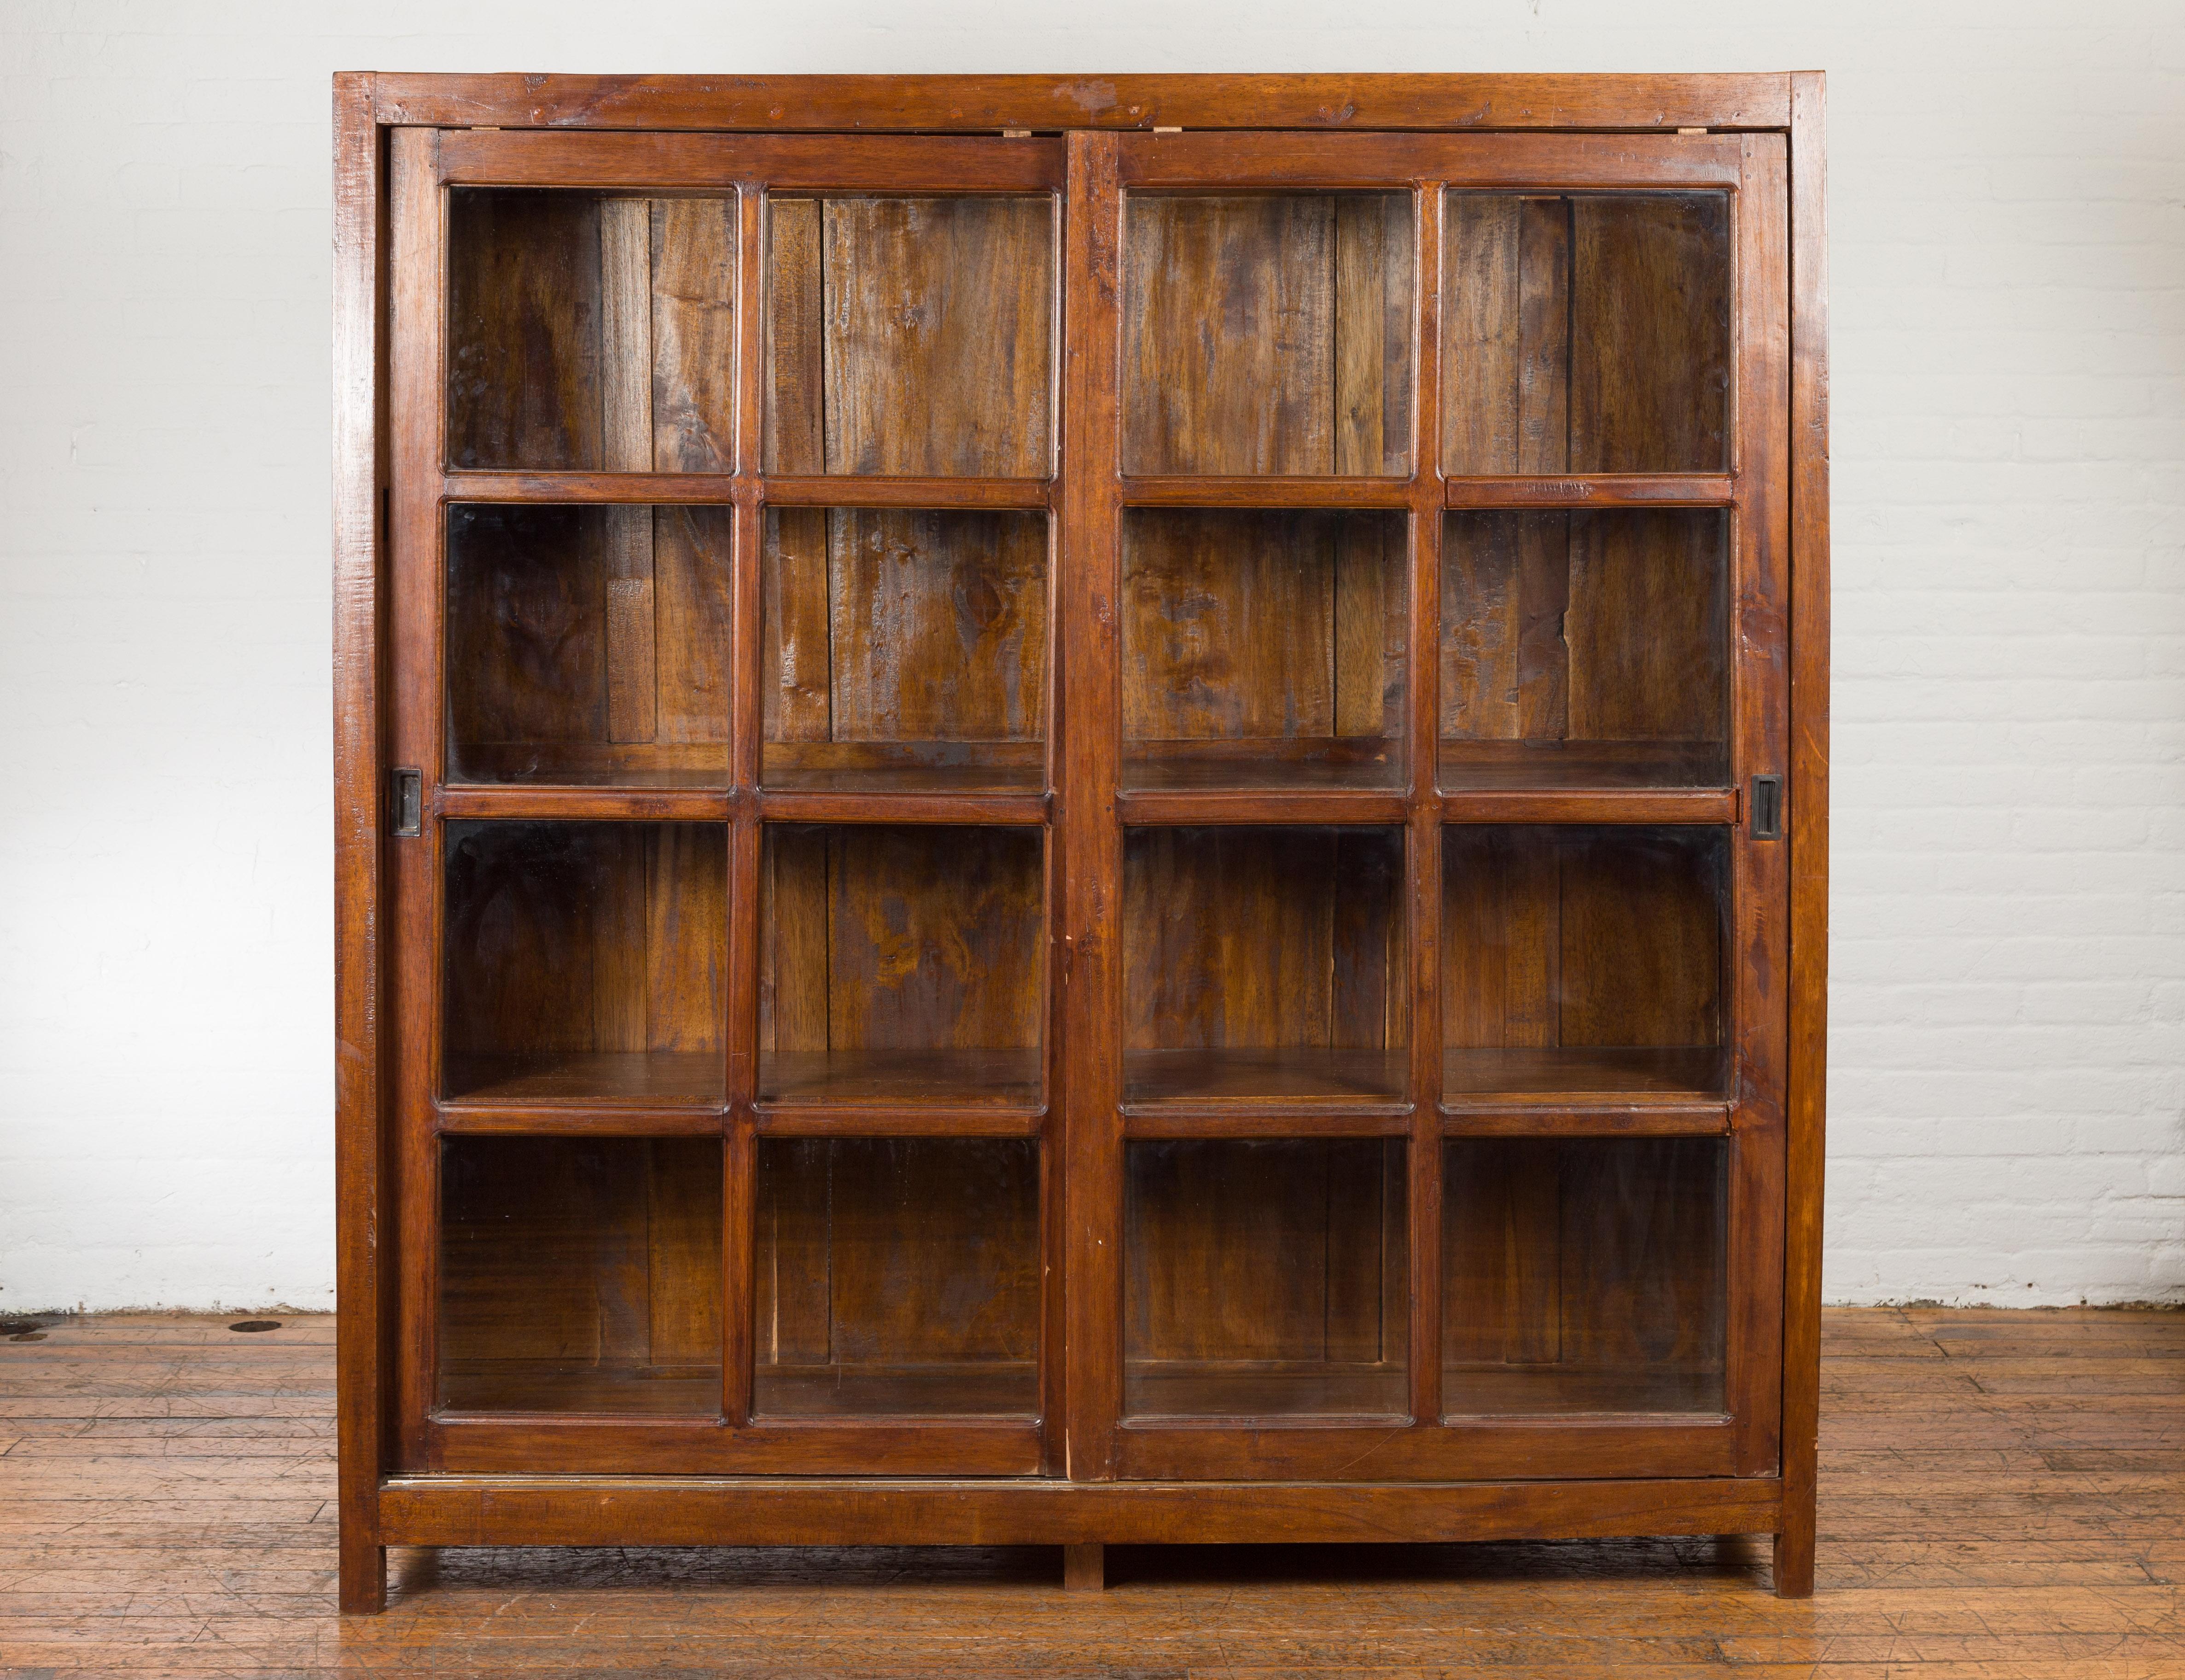 A Javanese wooden vitrine bookcase from the Mid-20th Century, with sliding paneled glass doors and brown patina. Created on the Island of Java during the second quarter of the 20th century, this wooden bookcase features a linear silhouette perfectly